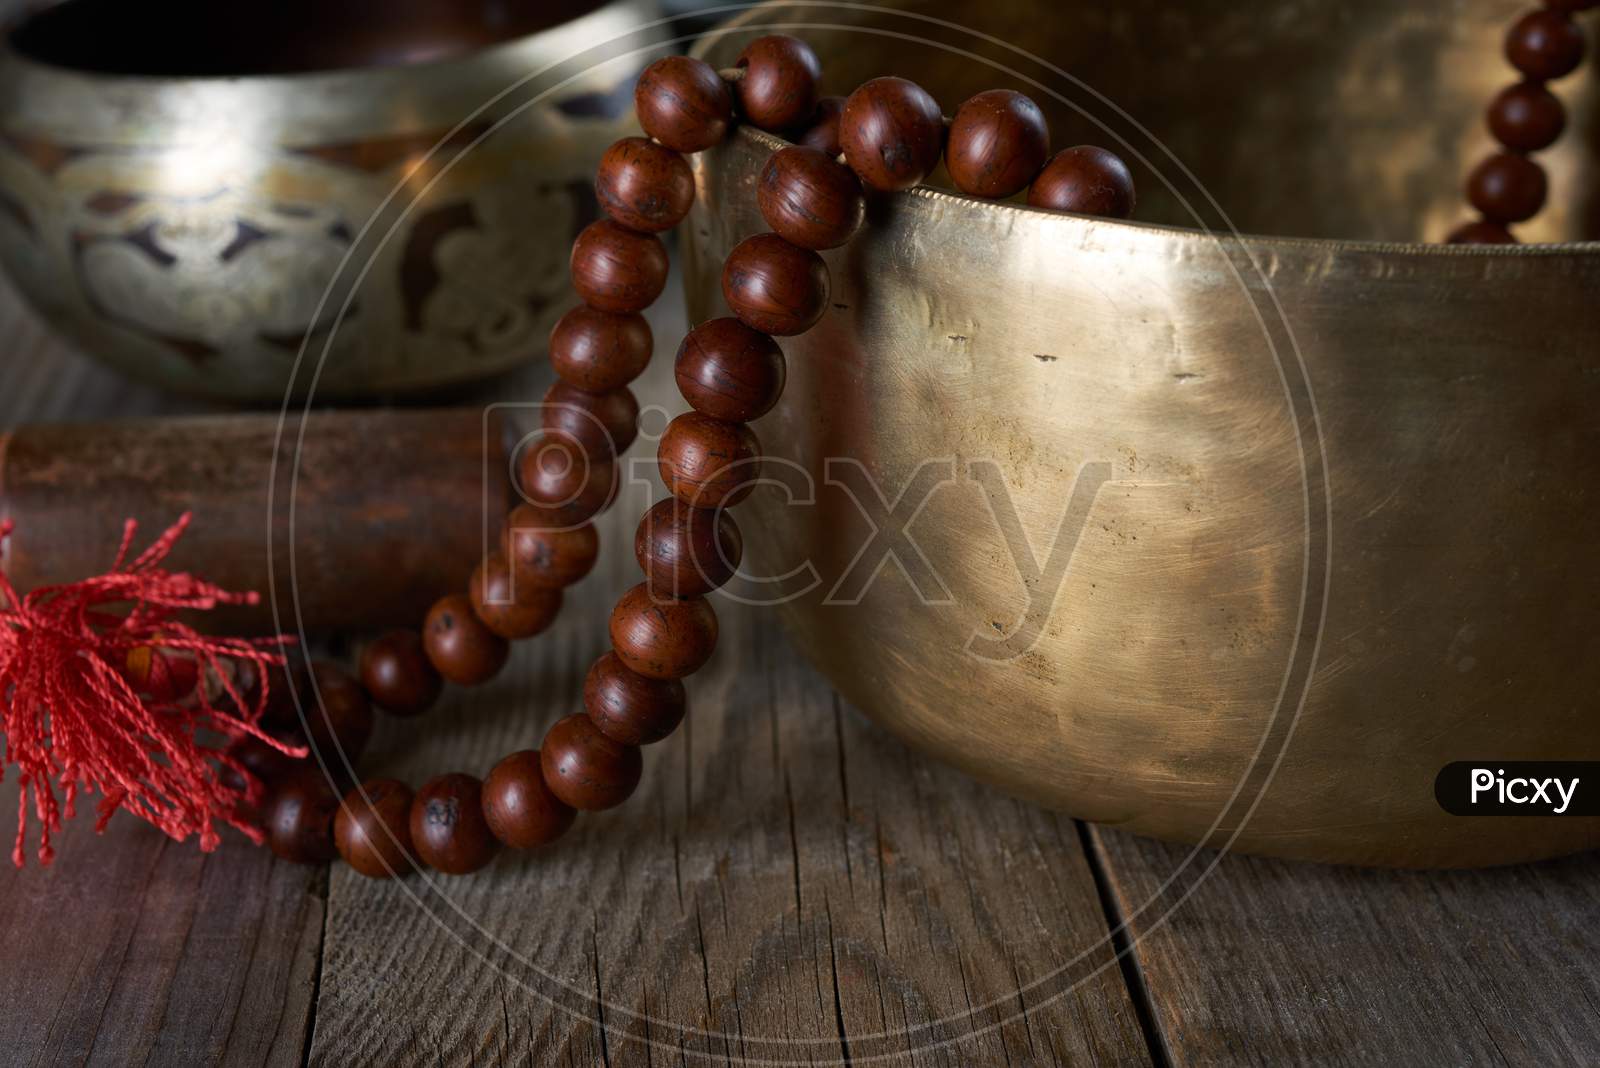 Tibetan Singing Copper Bowl With A Wooden Clapper And Prayer Rosary On A Gray Wooden Table